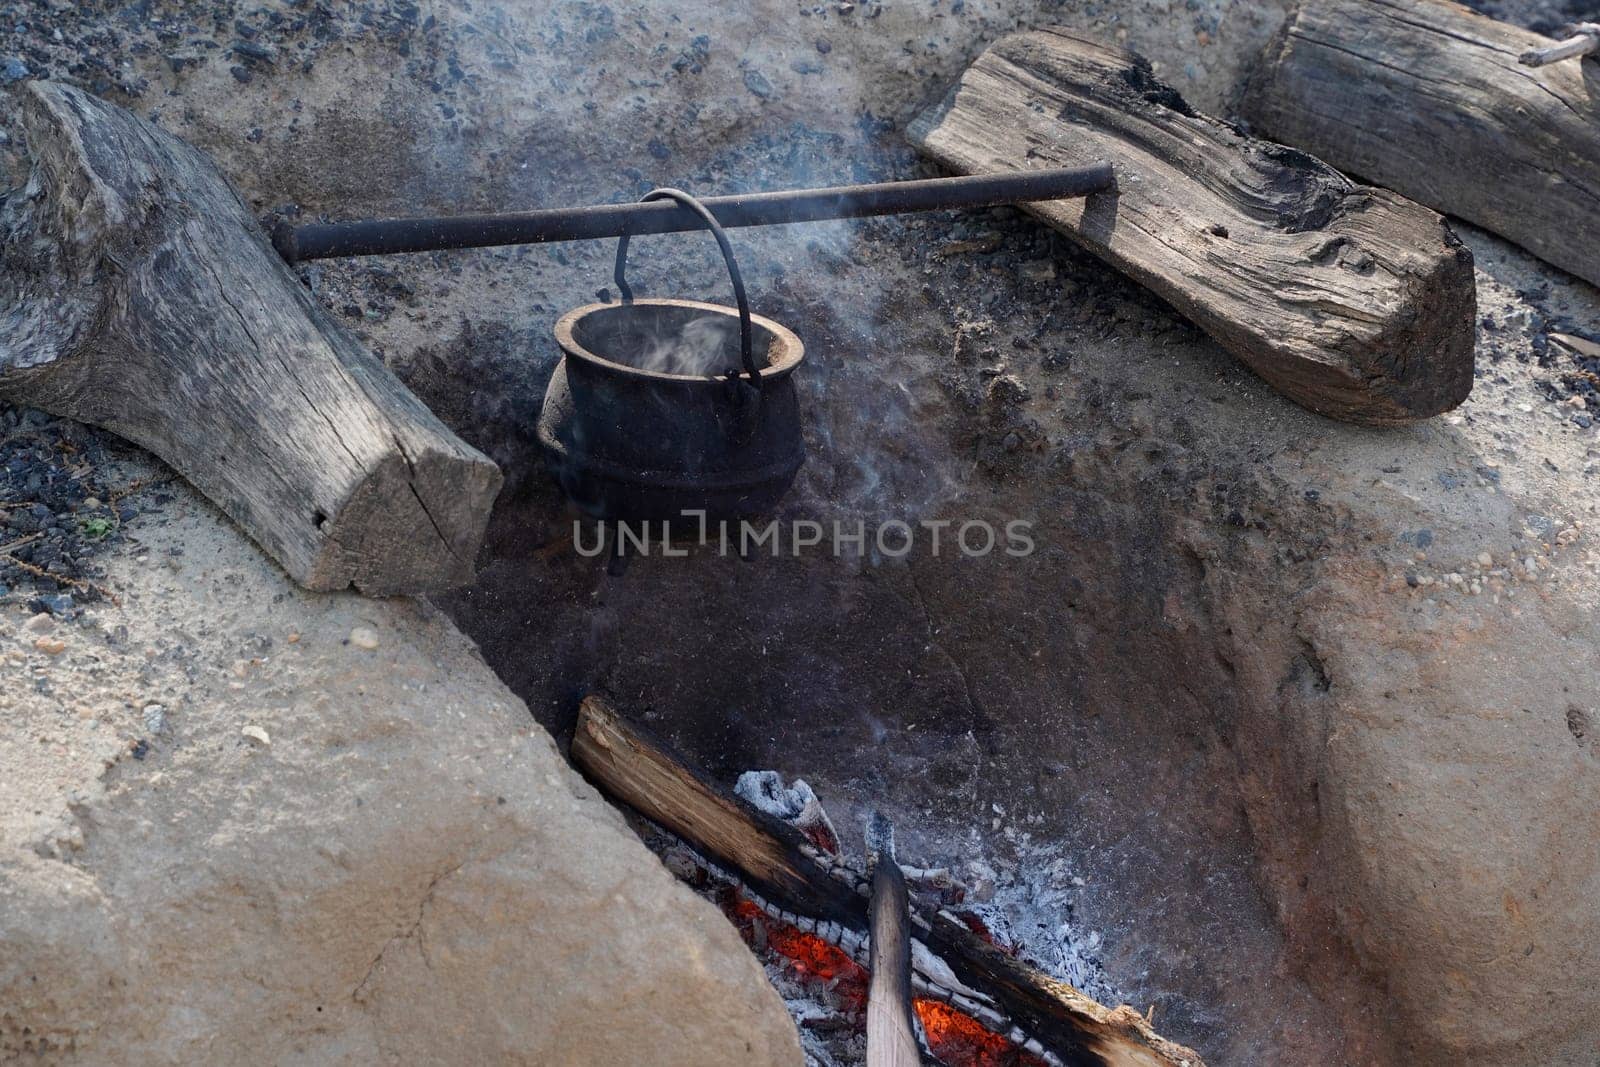 Water boiling on fire in camp site of American Revolution british soldier settler in Yorktown, Virginia by AndreaIzzotti